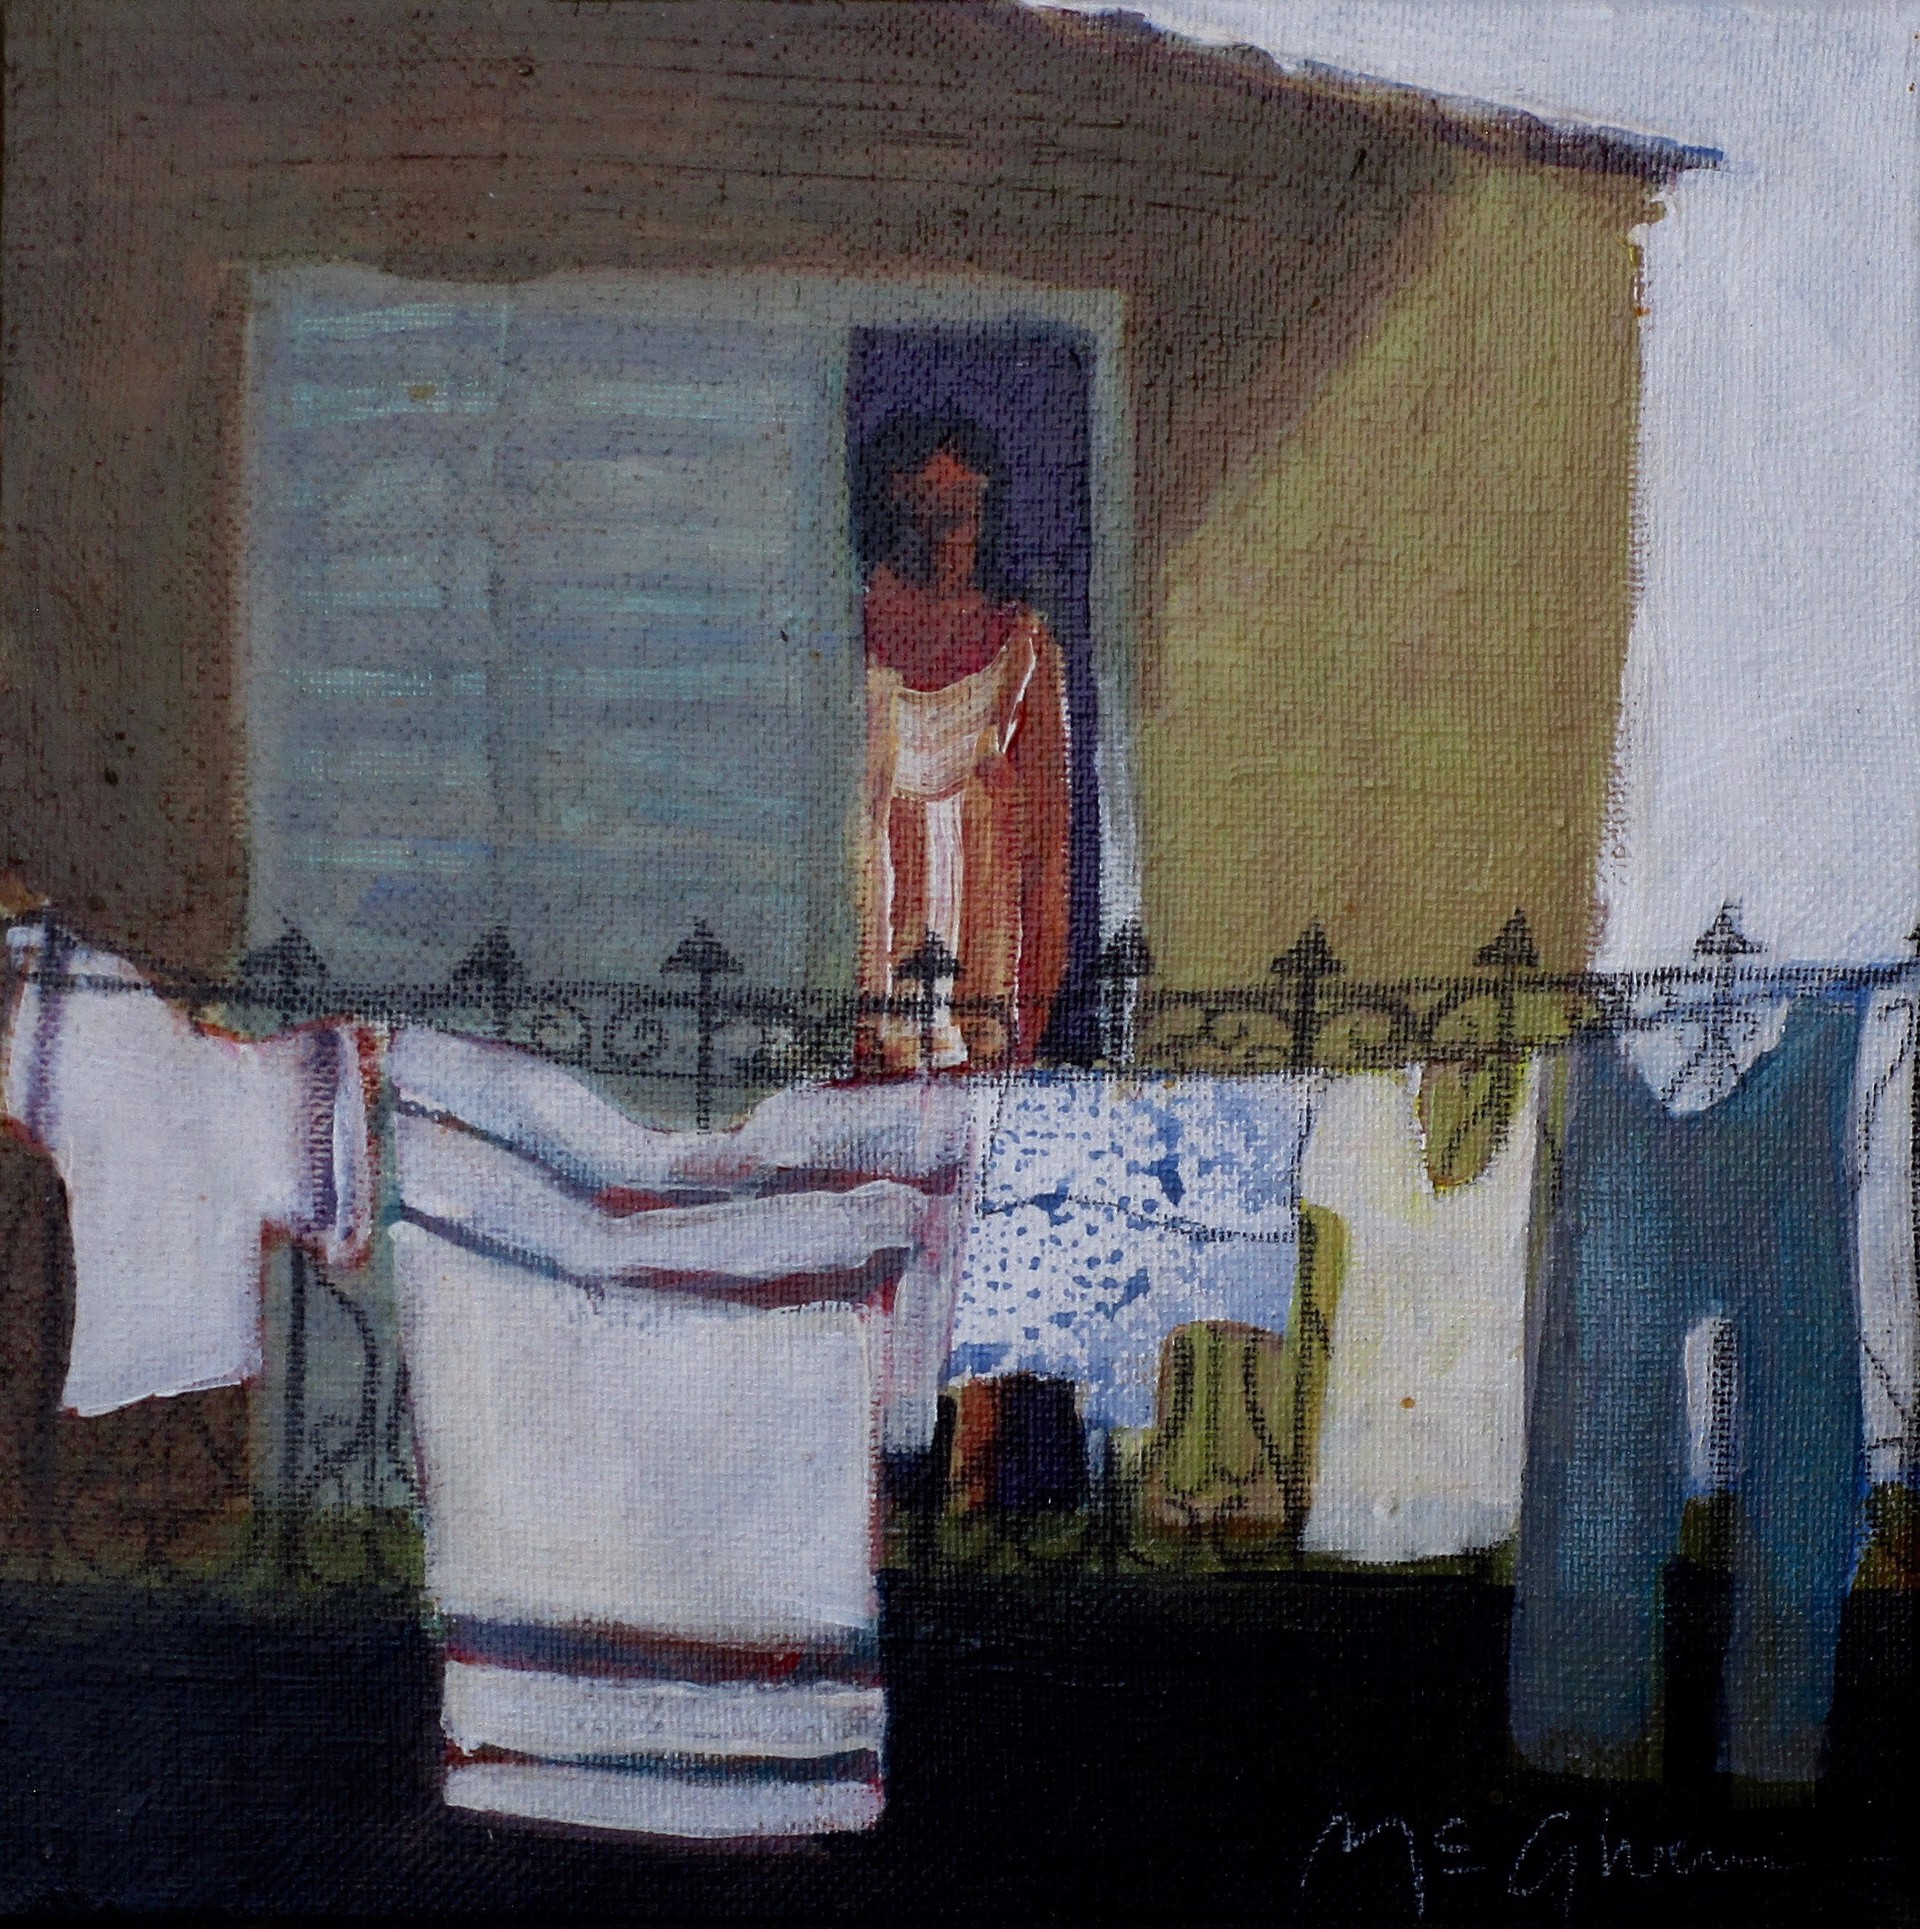 Watching Laundry Dry by Peggy McGivern